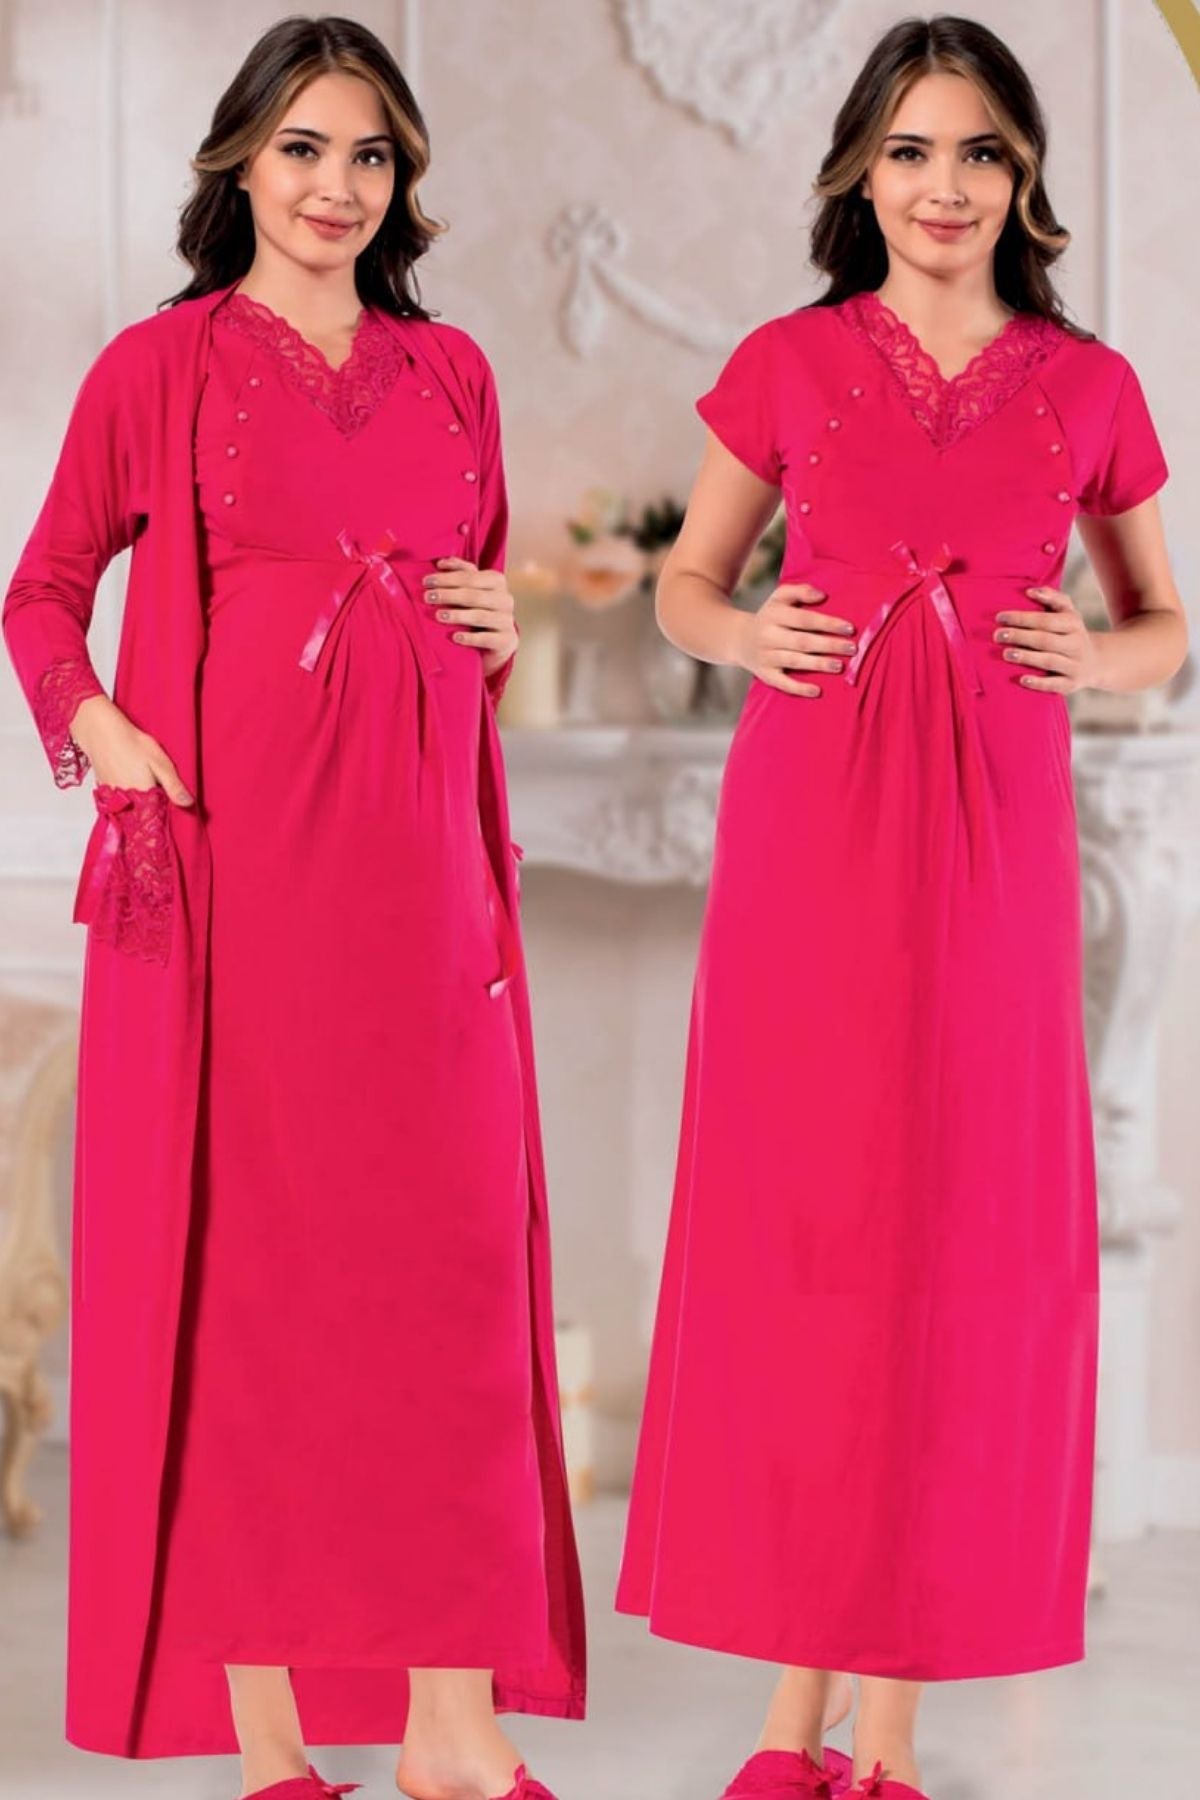 Lace V-Neck Maternity & Nursing Nightgown With Robe Fuchsia - 27787